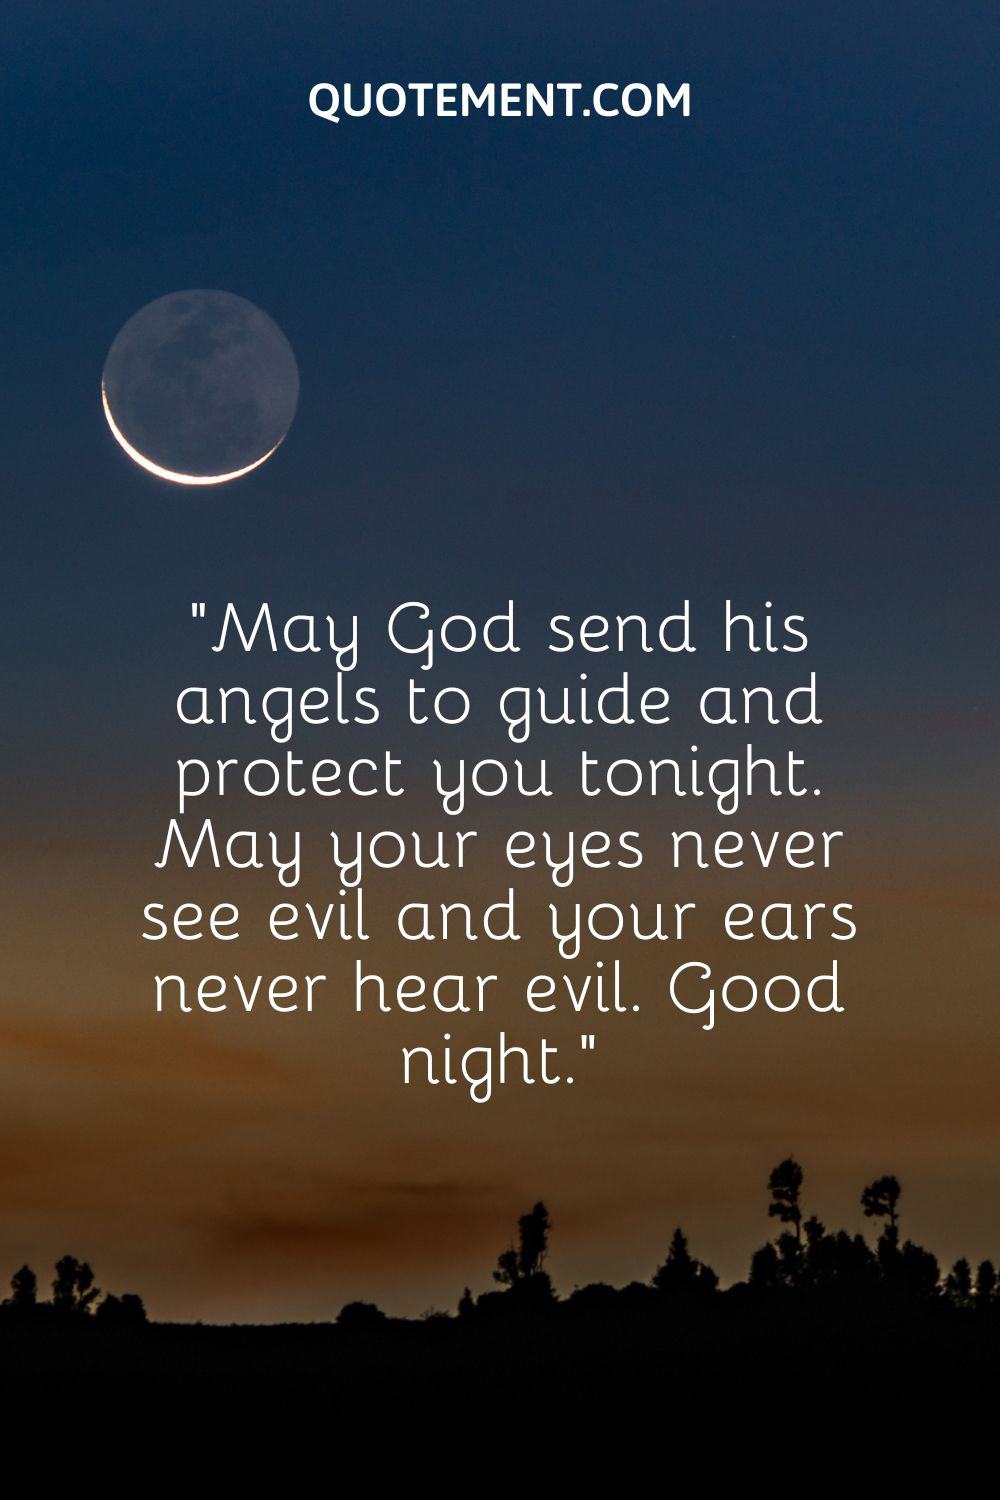 May God send his angels to guide and protect you tonight